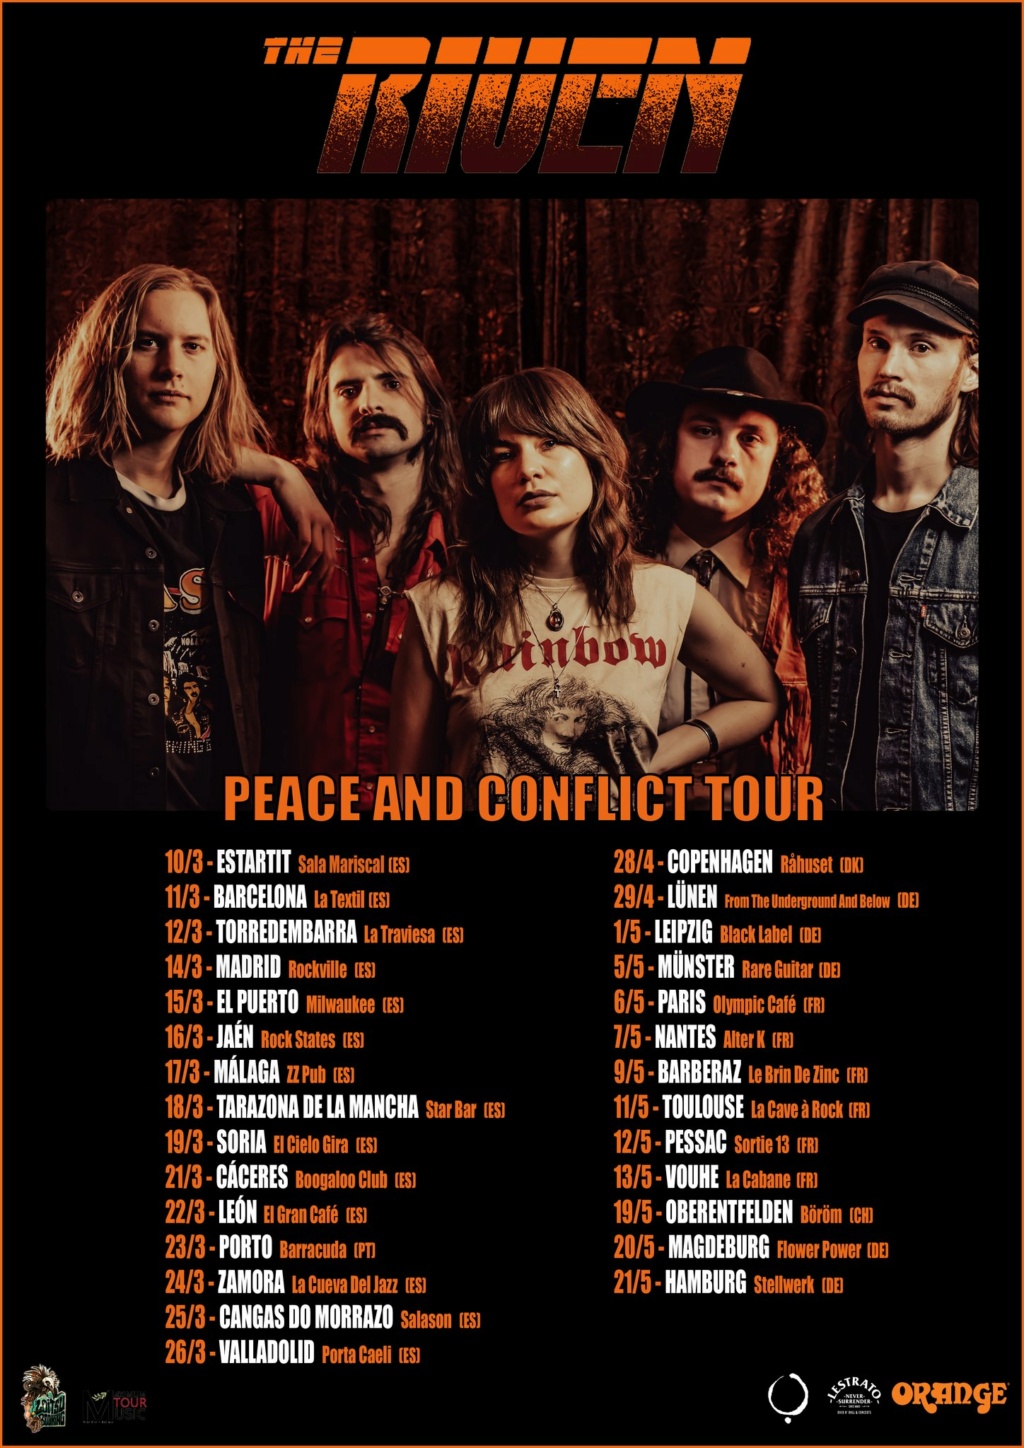 The Riven - Peace And Conflict (2022) 70 Hard Rock, Heavy Blues desde Suecia. 1c503